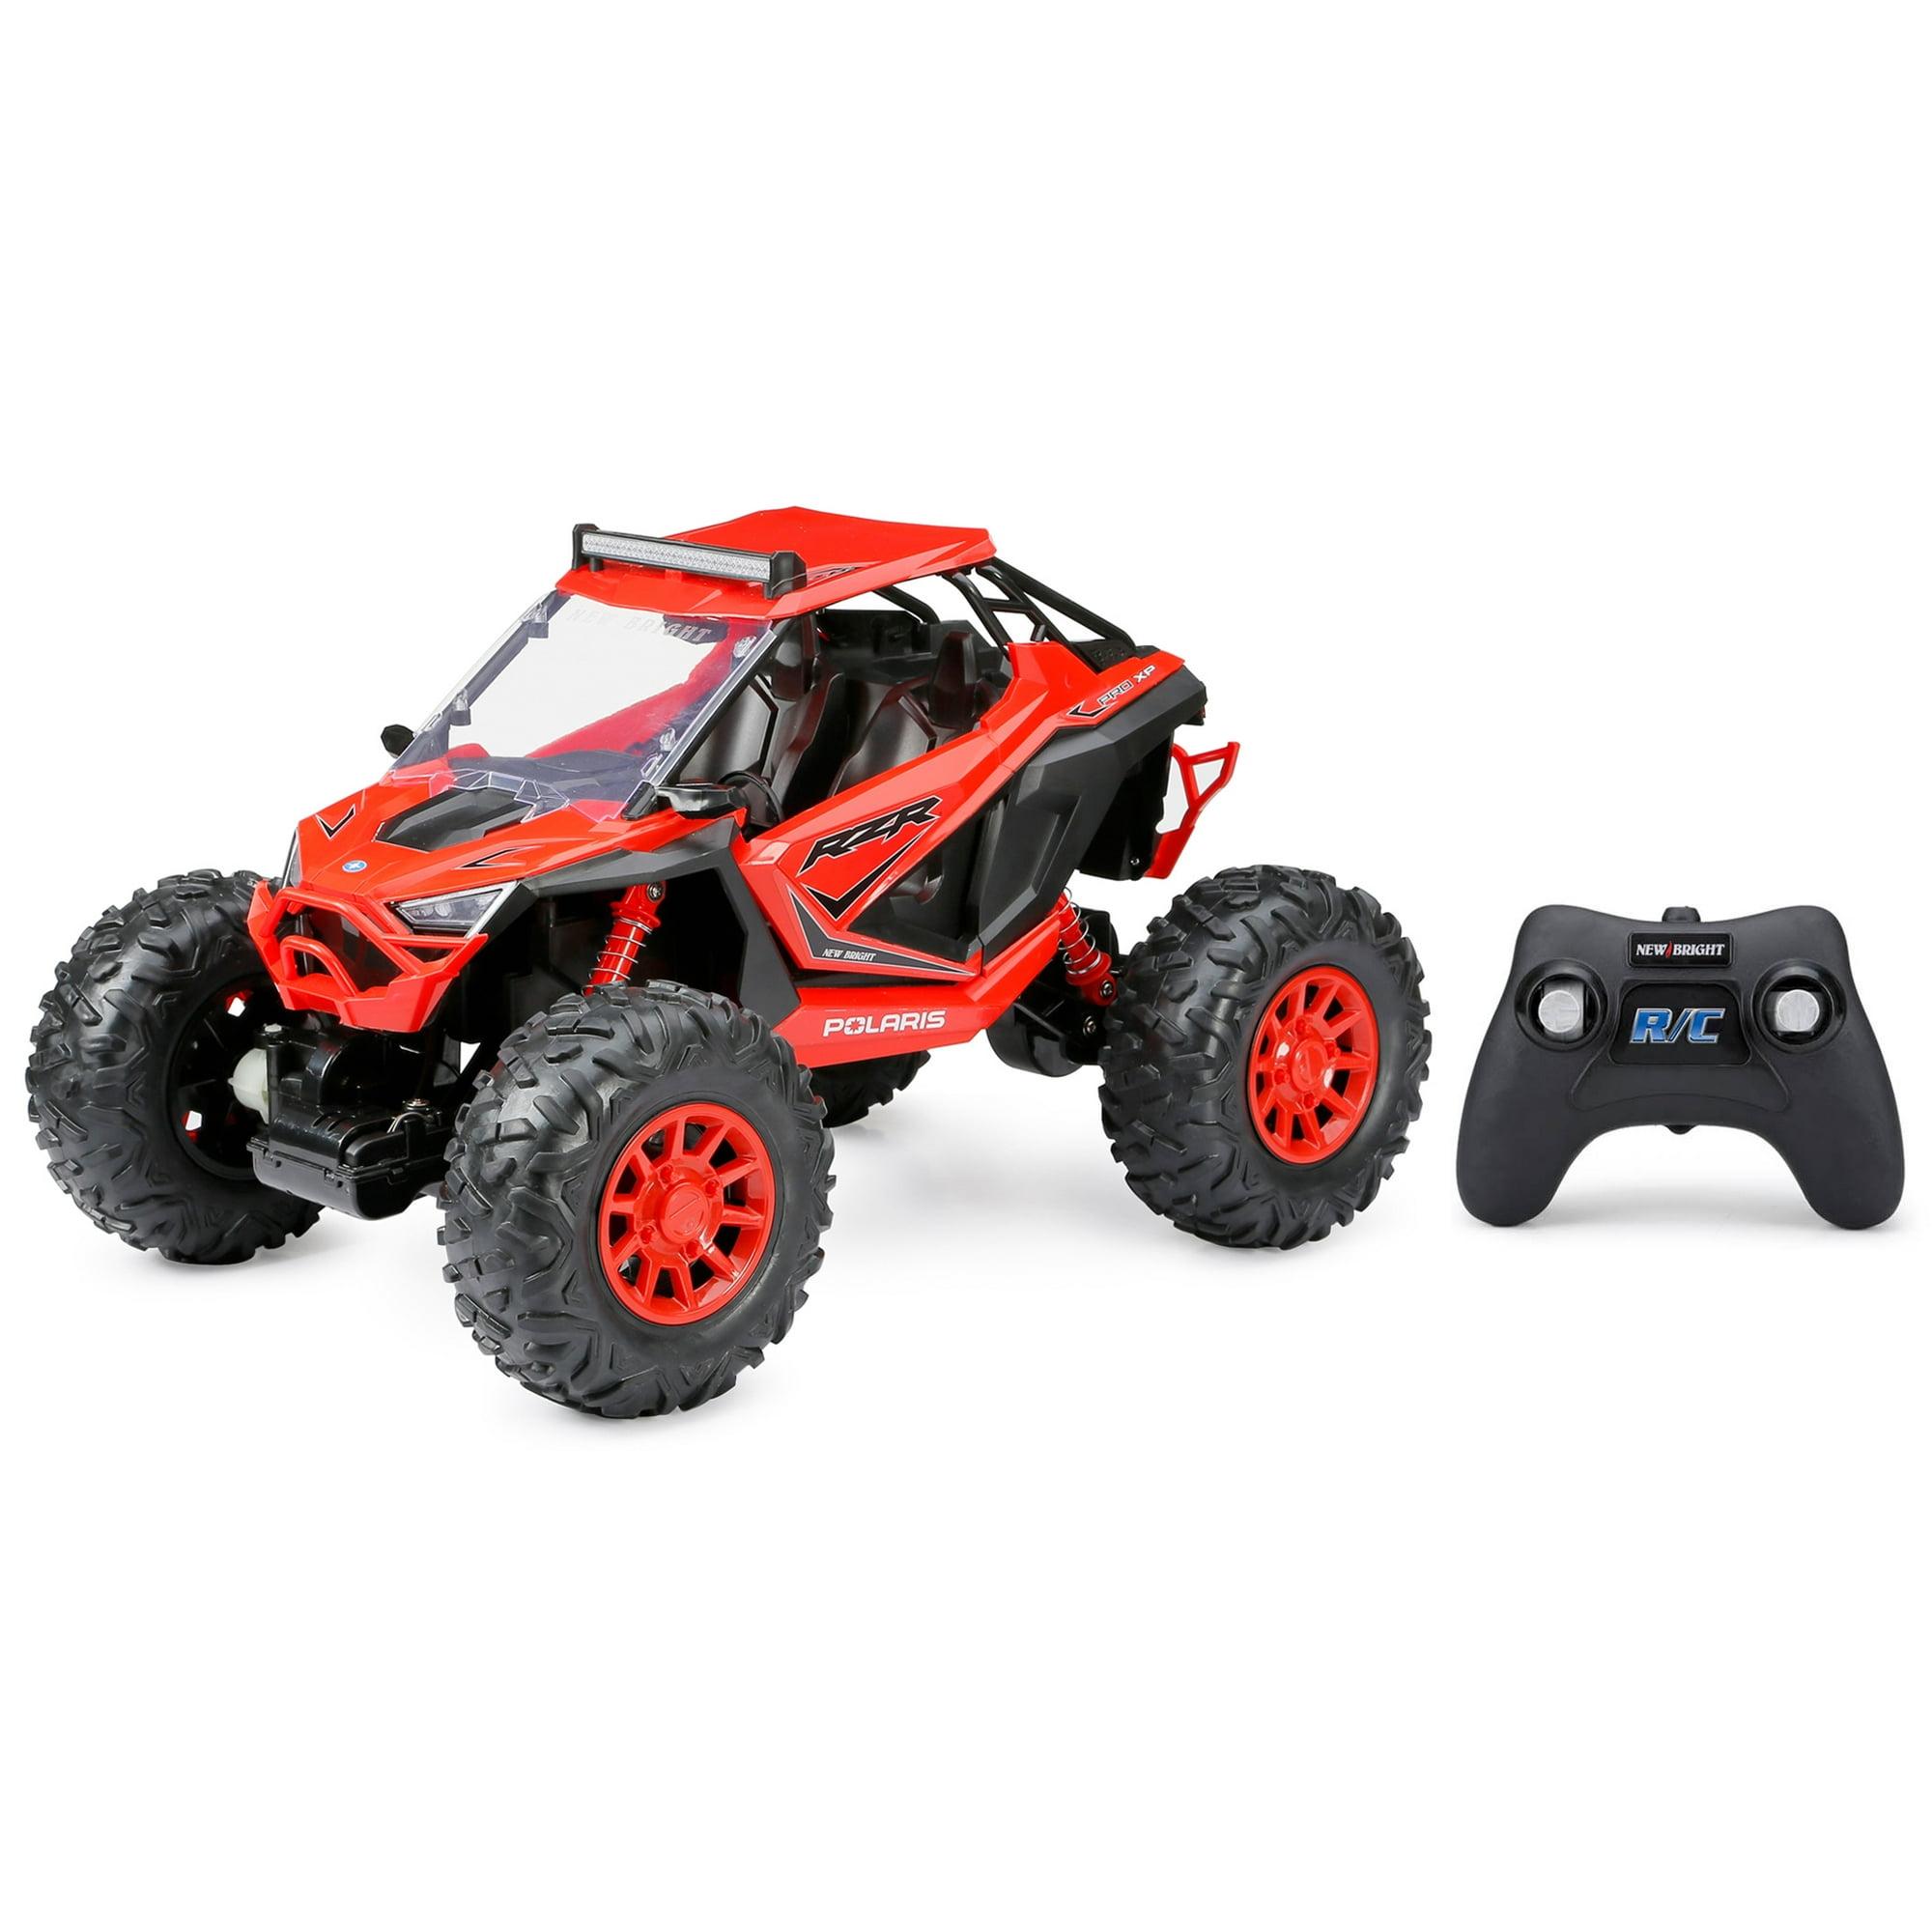 Rc All Terrain Vehicle: Popular RC ATV Brands and Customization Options